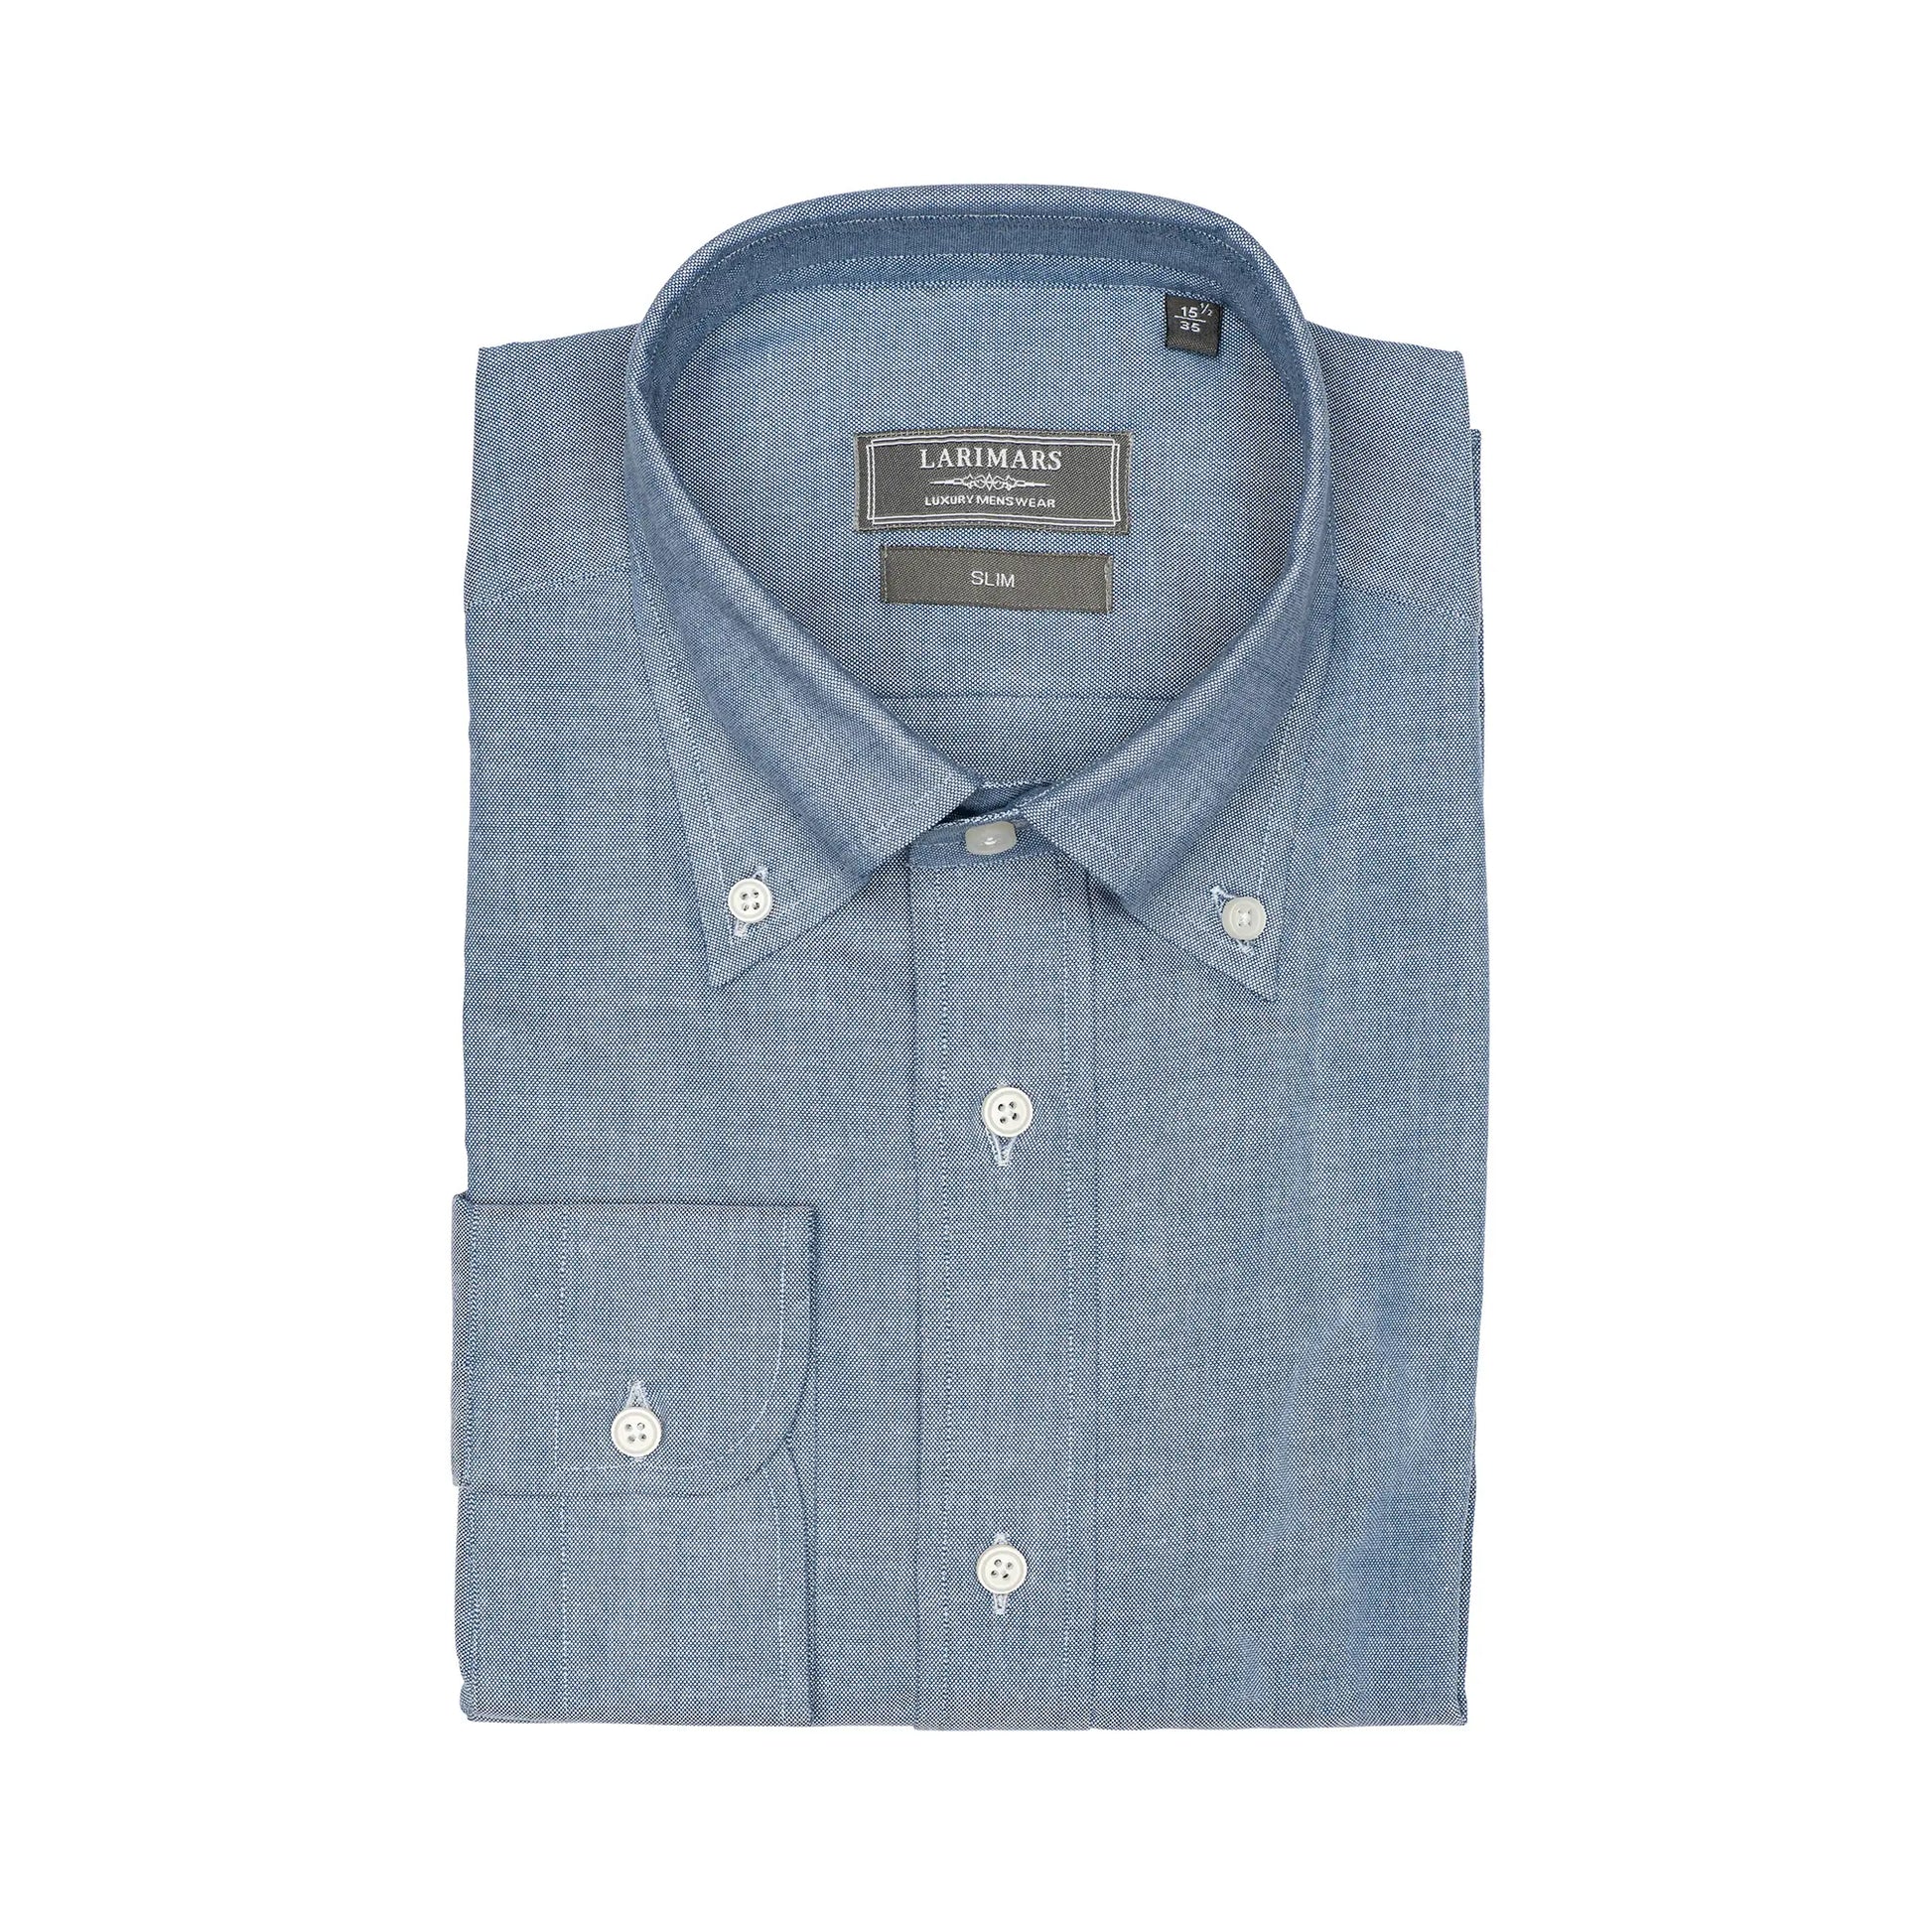 Pale Blue | Light Weight Oxford - Larimars Clothing Men's Formal and casual wear shirts